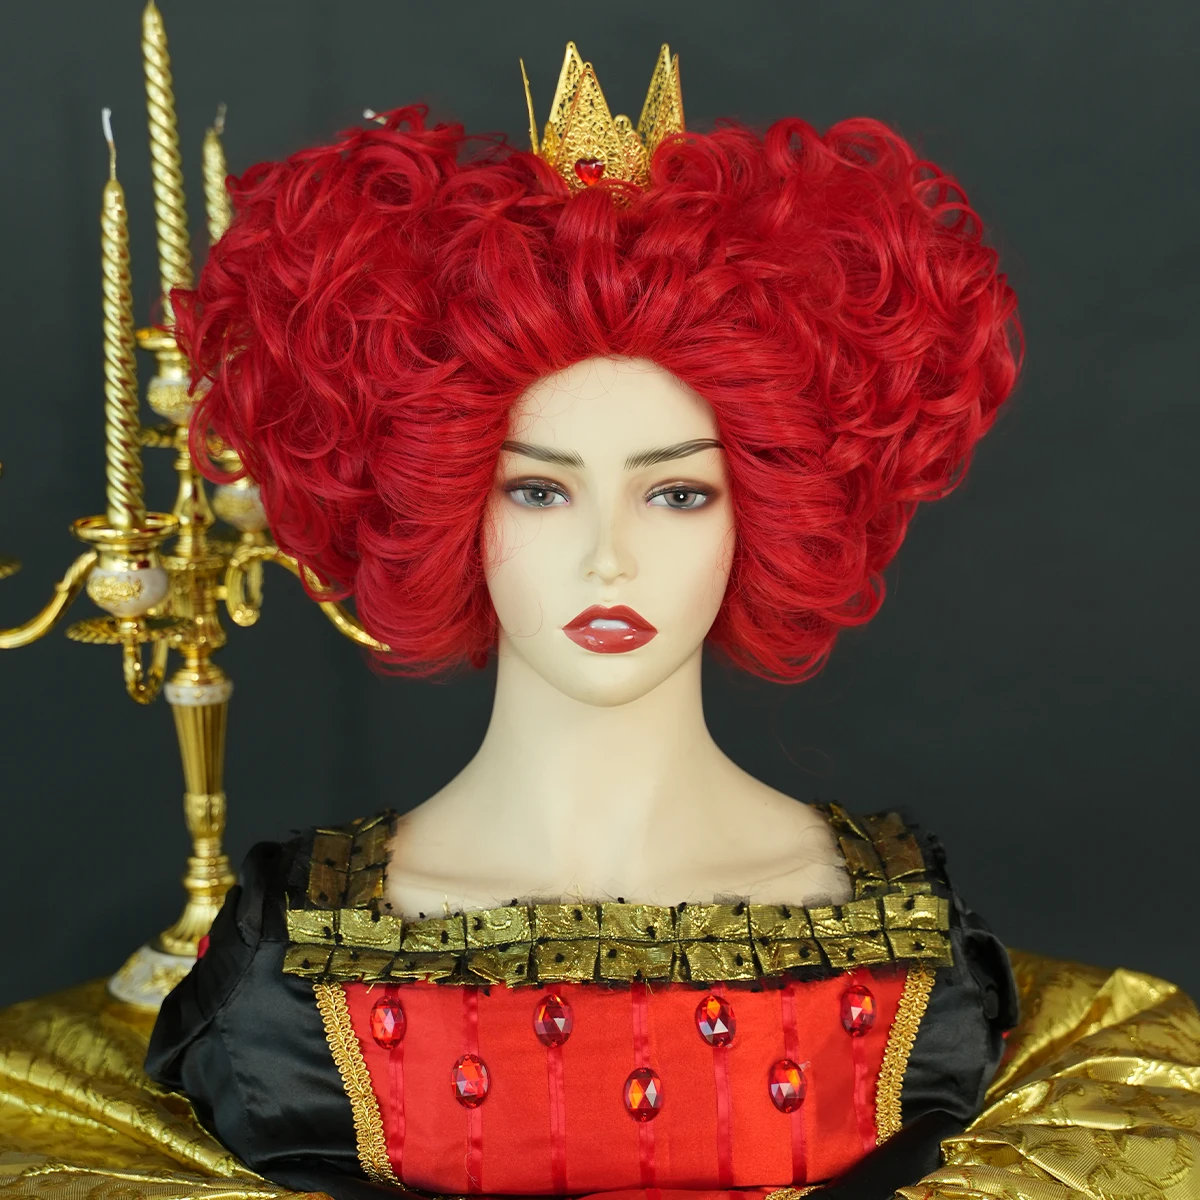 Hh wigs new royal red queen wig light red short curly hair synthetic heart cosplay wigs thumb200